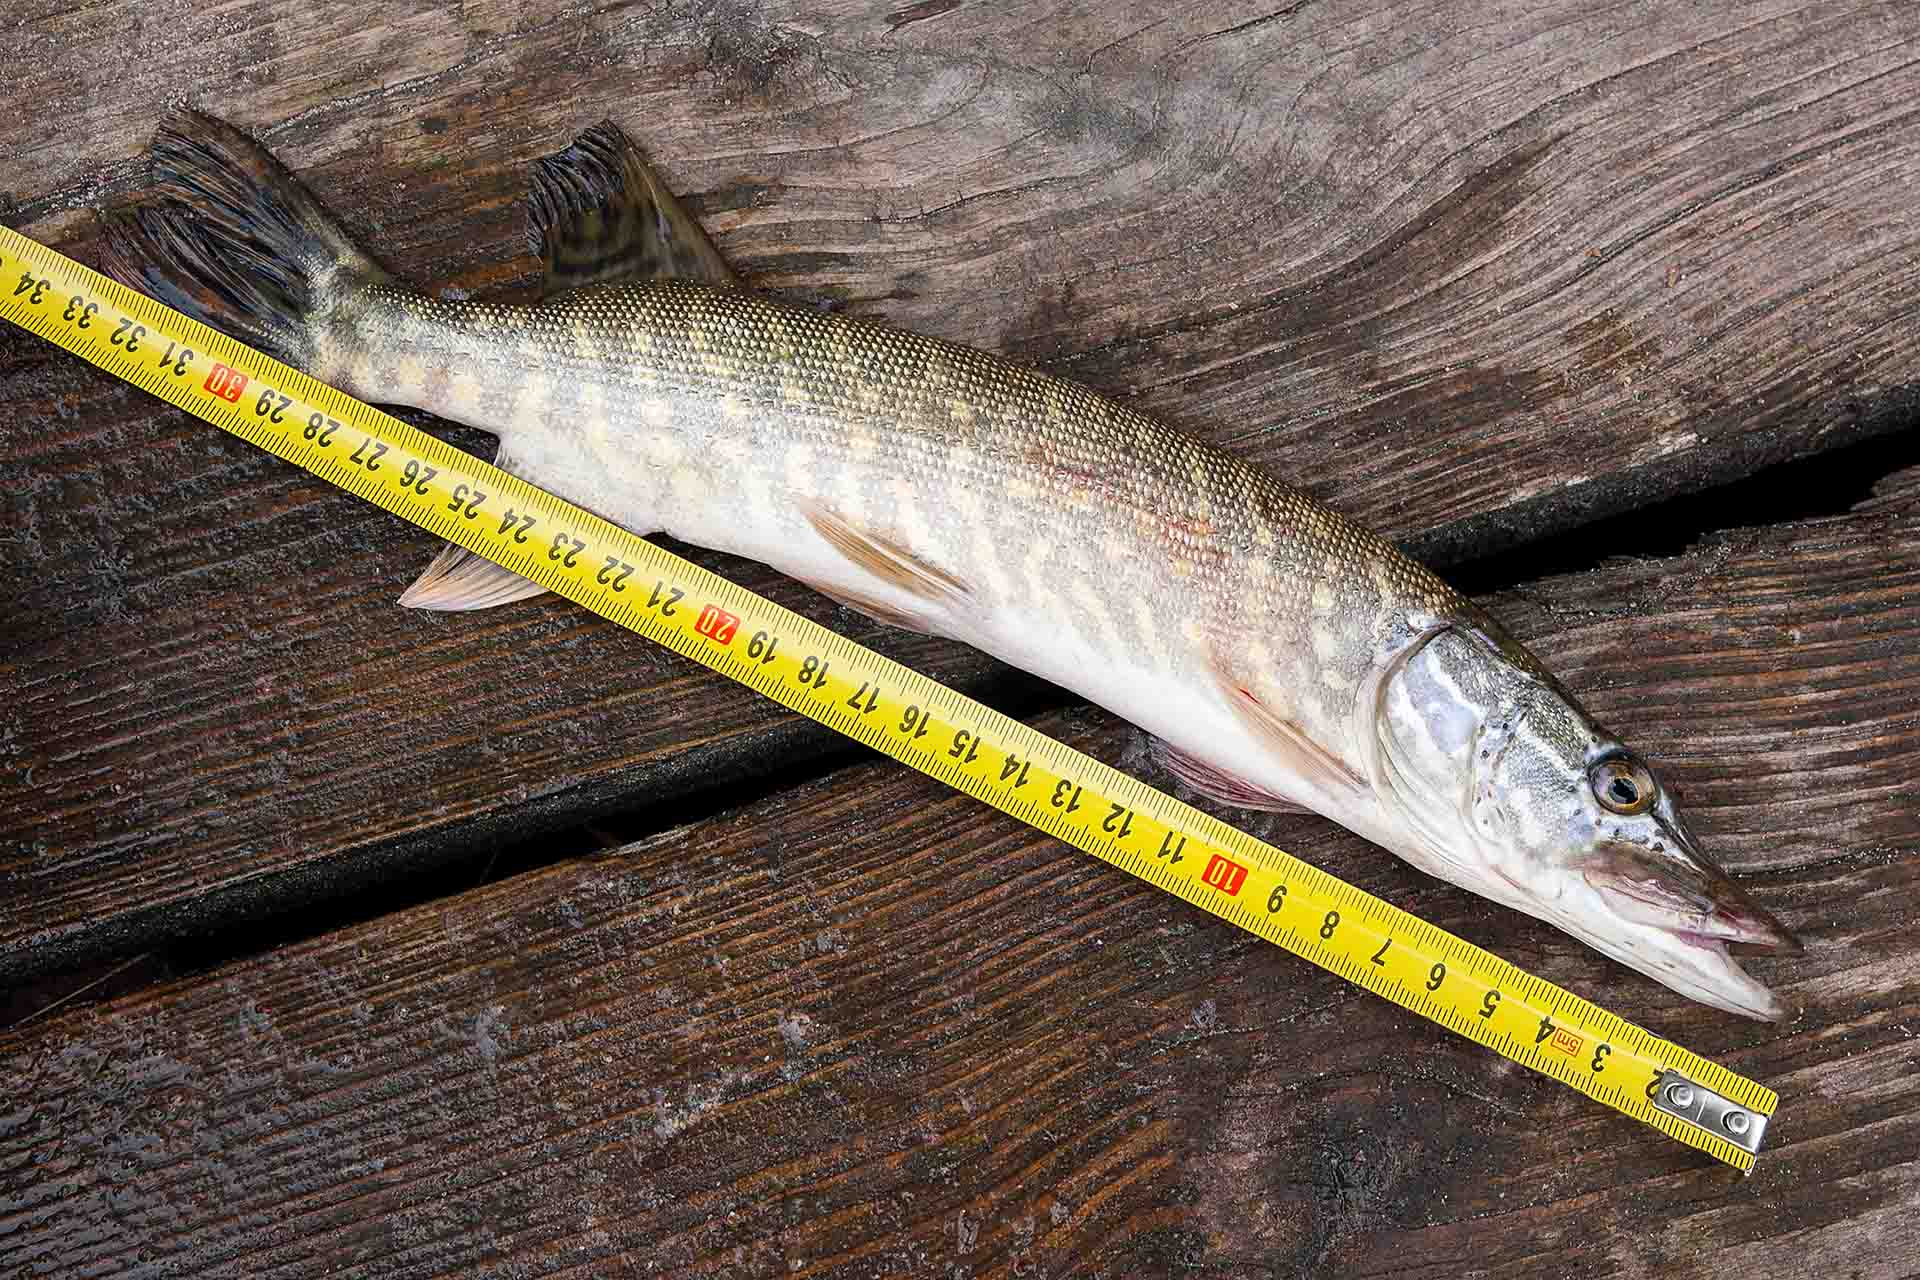 Freshwater Northern pike fish know as Esox Lucius and tape-measure lying on vintage wooden background. Fishing concept, good catch - big freshwater pike fish just taken from the water and tape-measure.